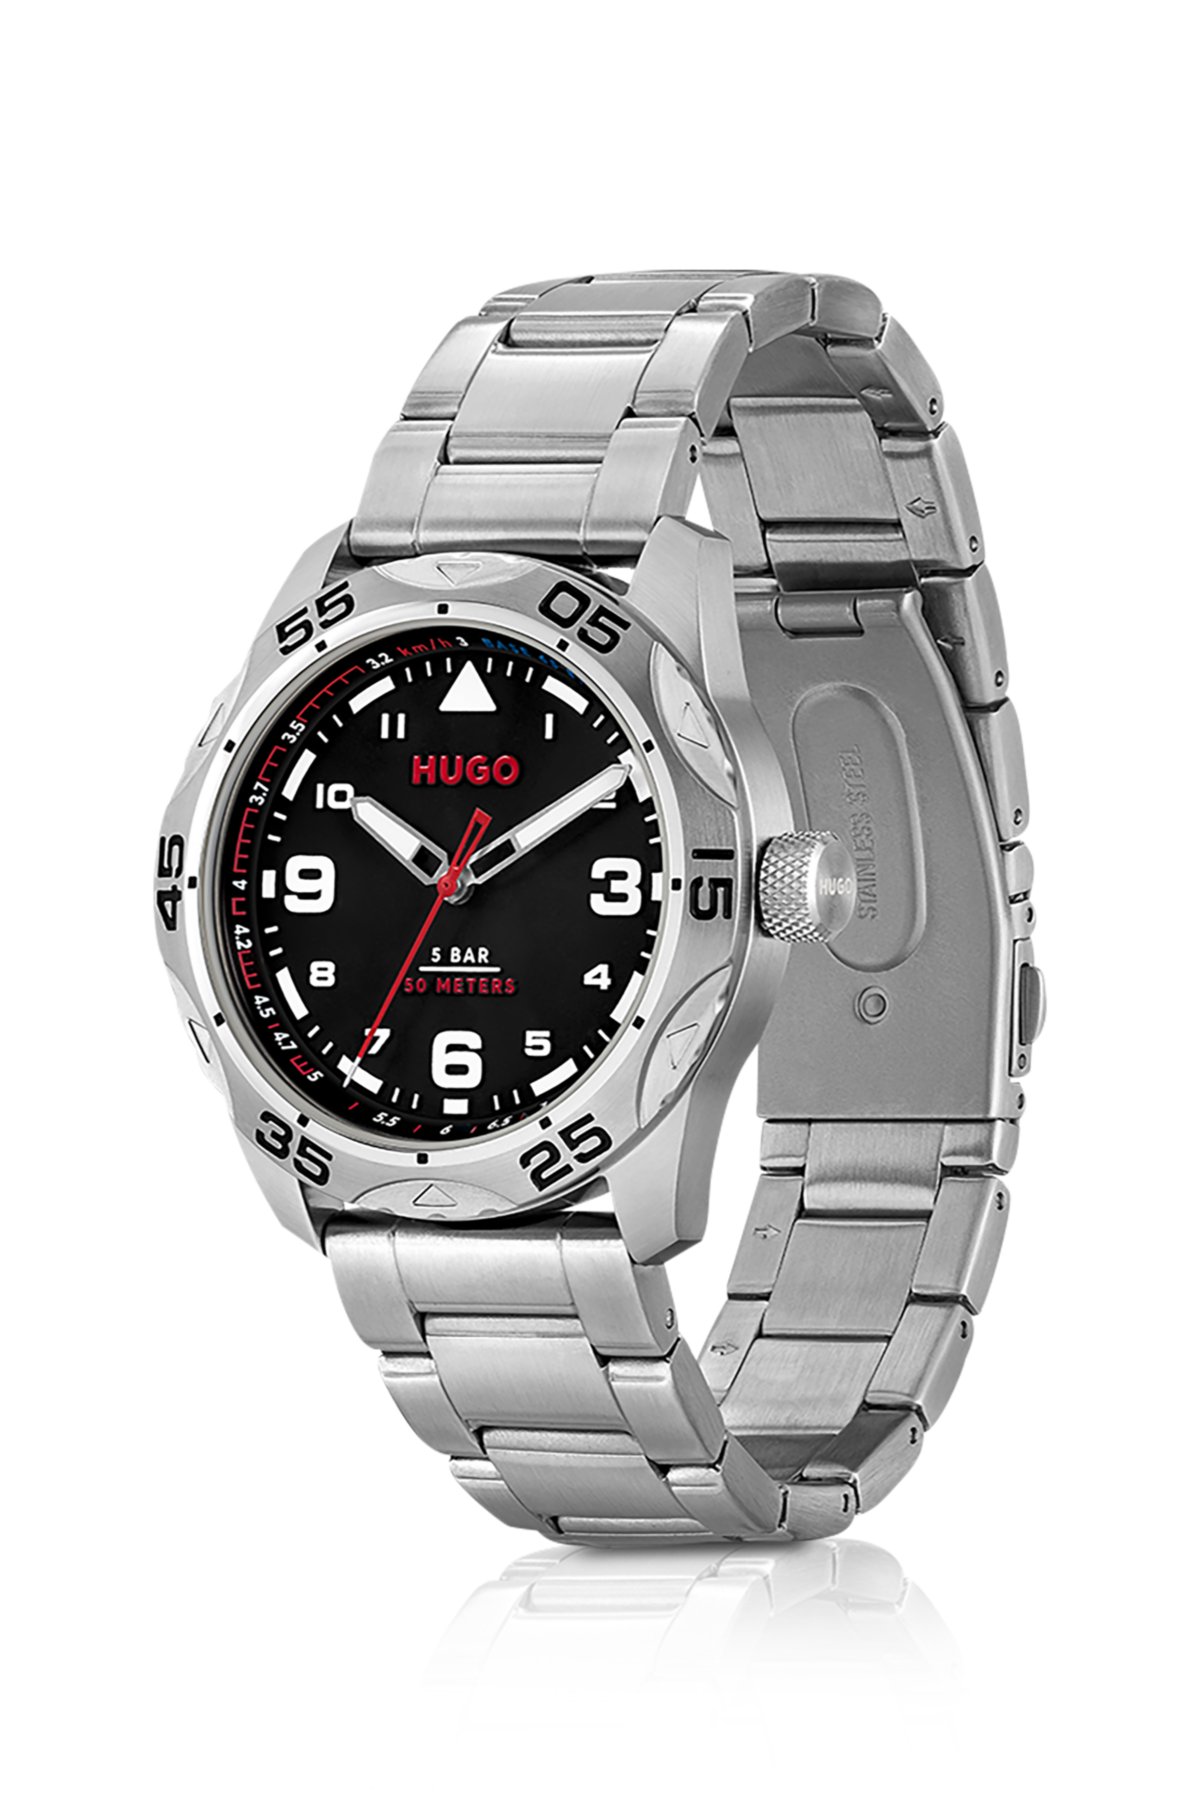 Black-dial watch with stainless-steel link bracelet, Silver